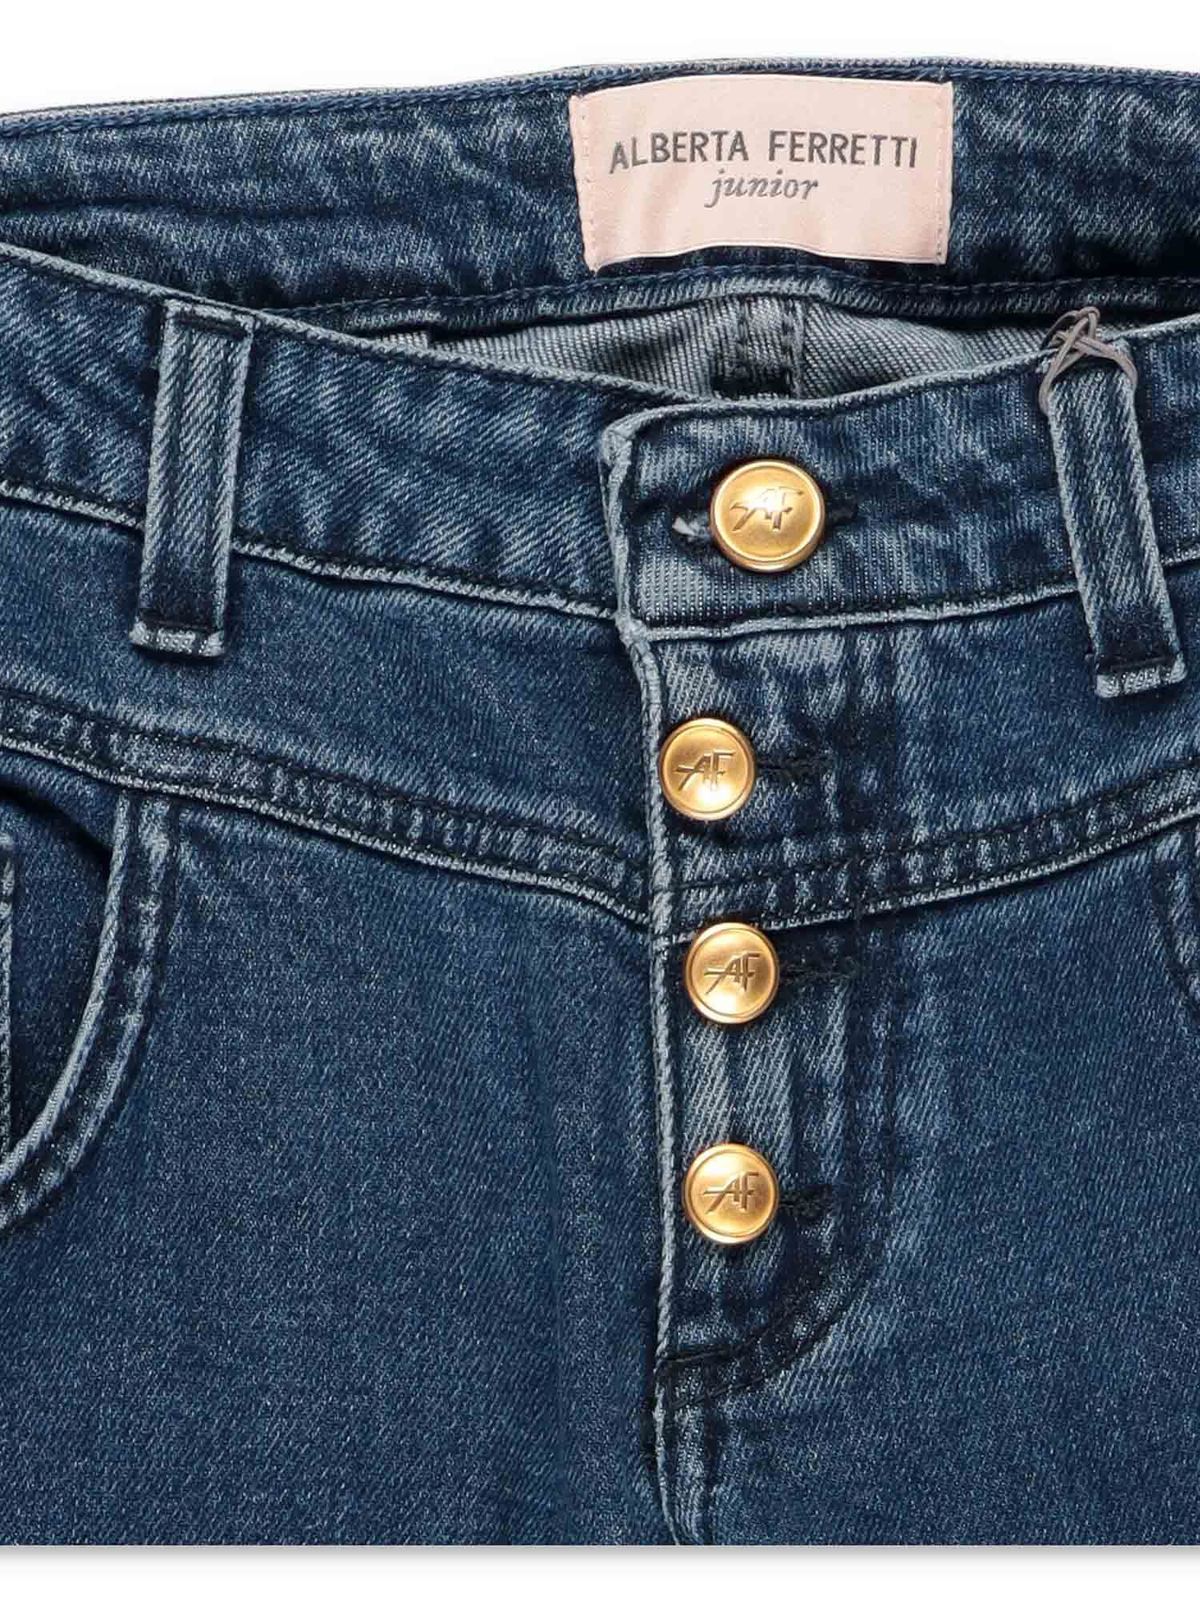 Jeans Alberta Ferretti - Blue jeans with gold buttons - 025326126